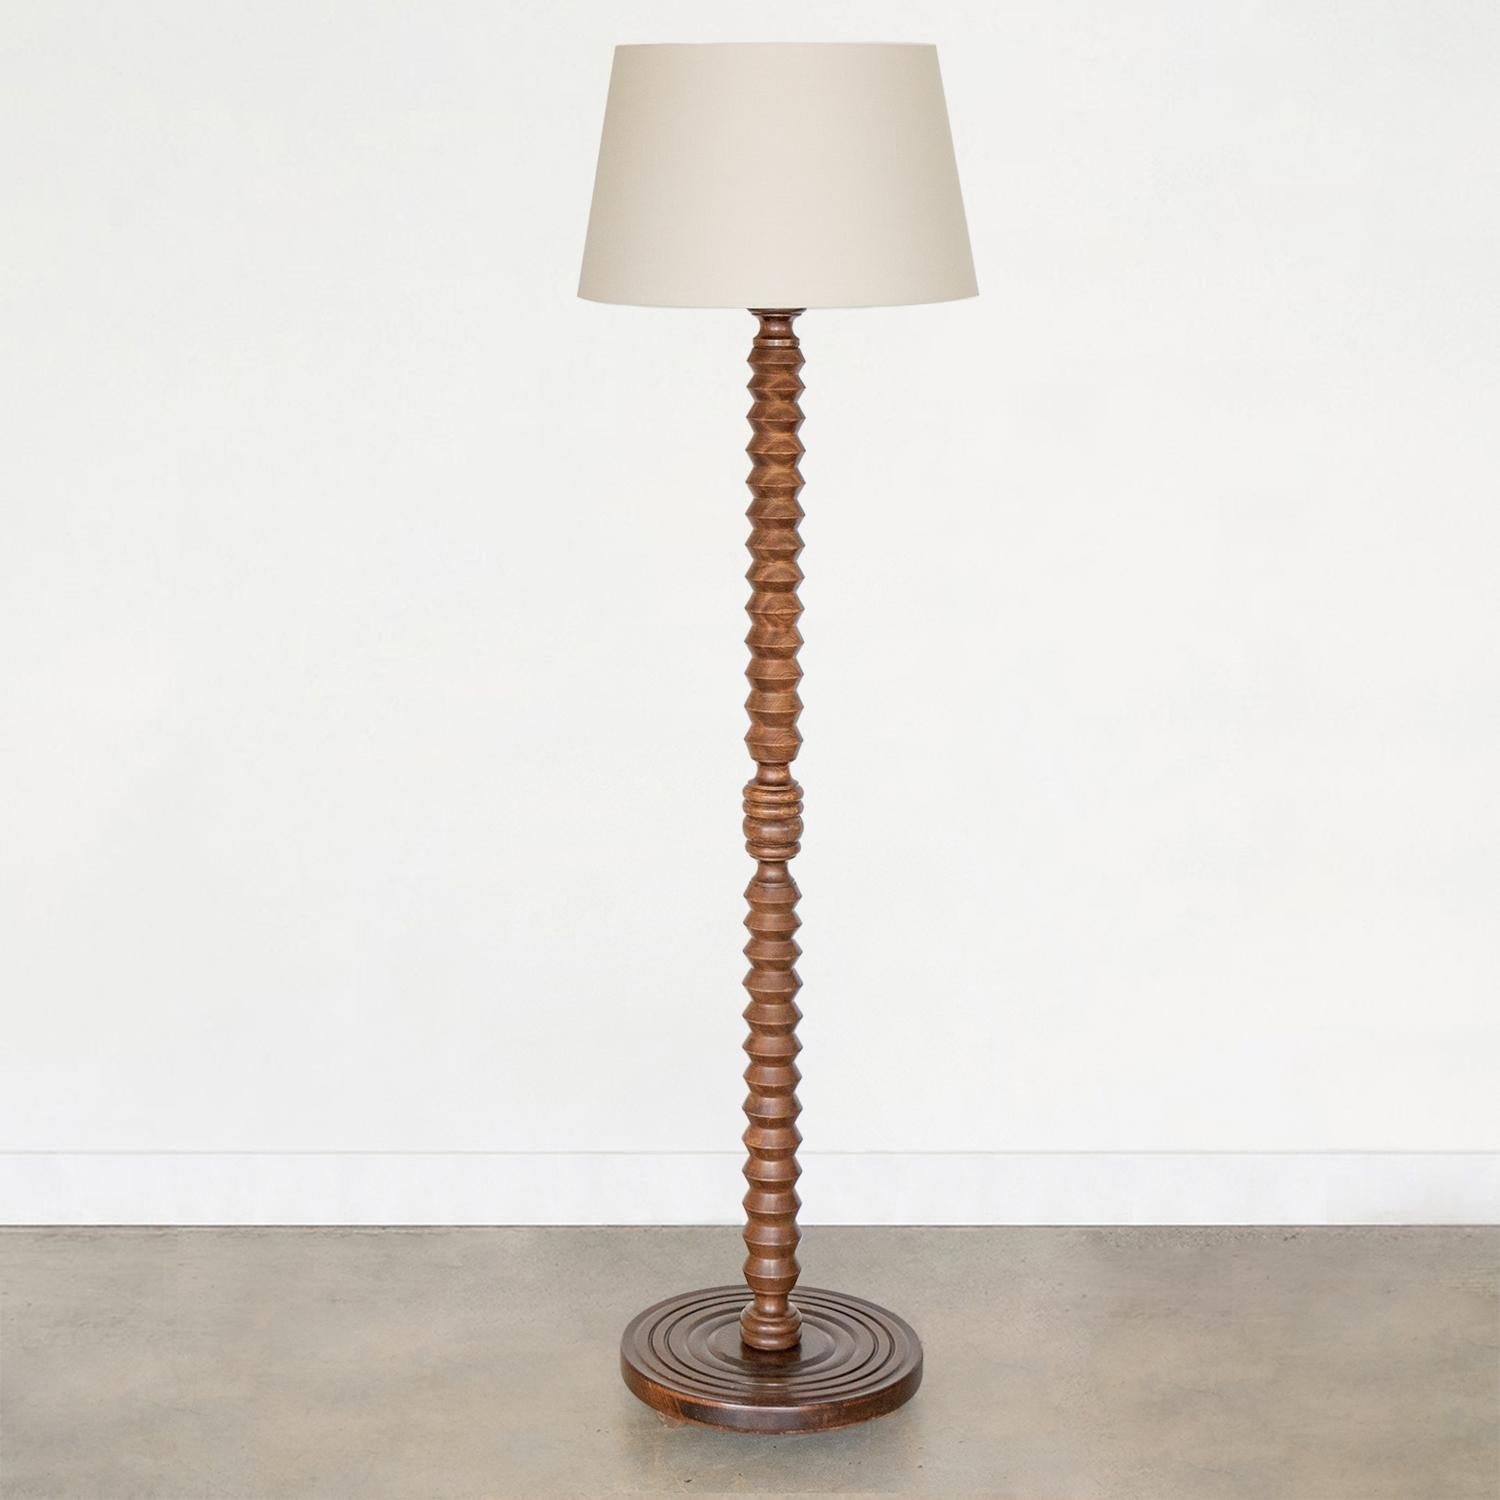 Lovely carved wood floor lamp by Charles Dudouyt from France, 1940s. Great carved design on stem with dark stain on wood. Newly re-wired and new linen shade. Great vintage condition.